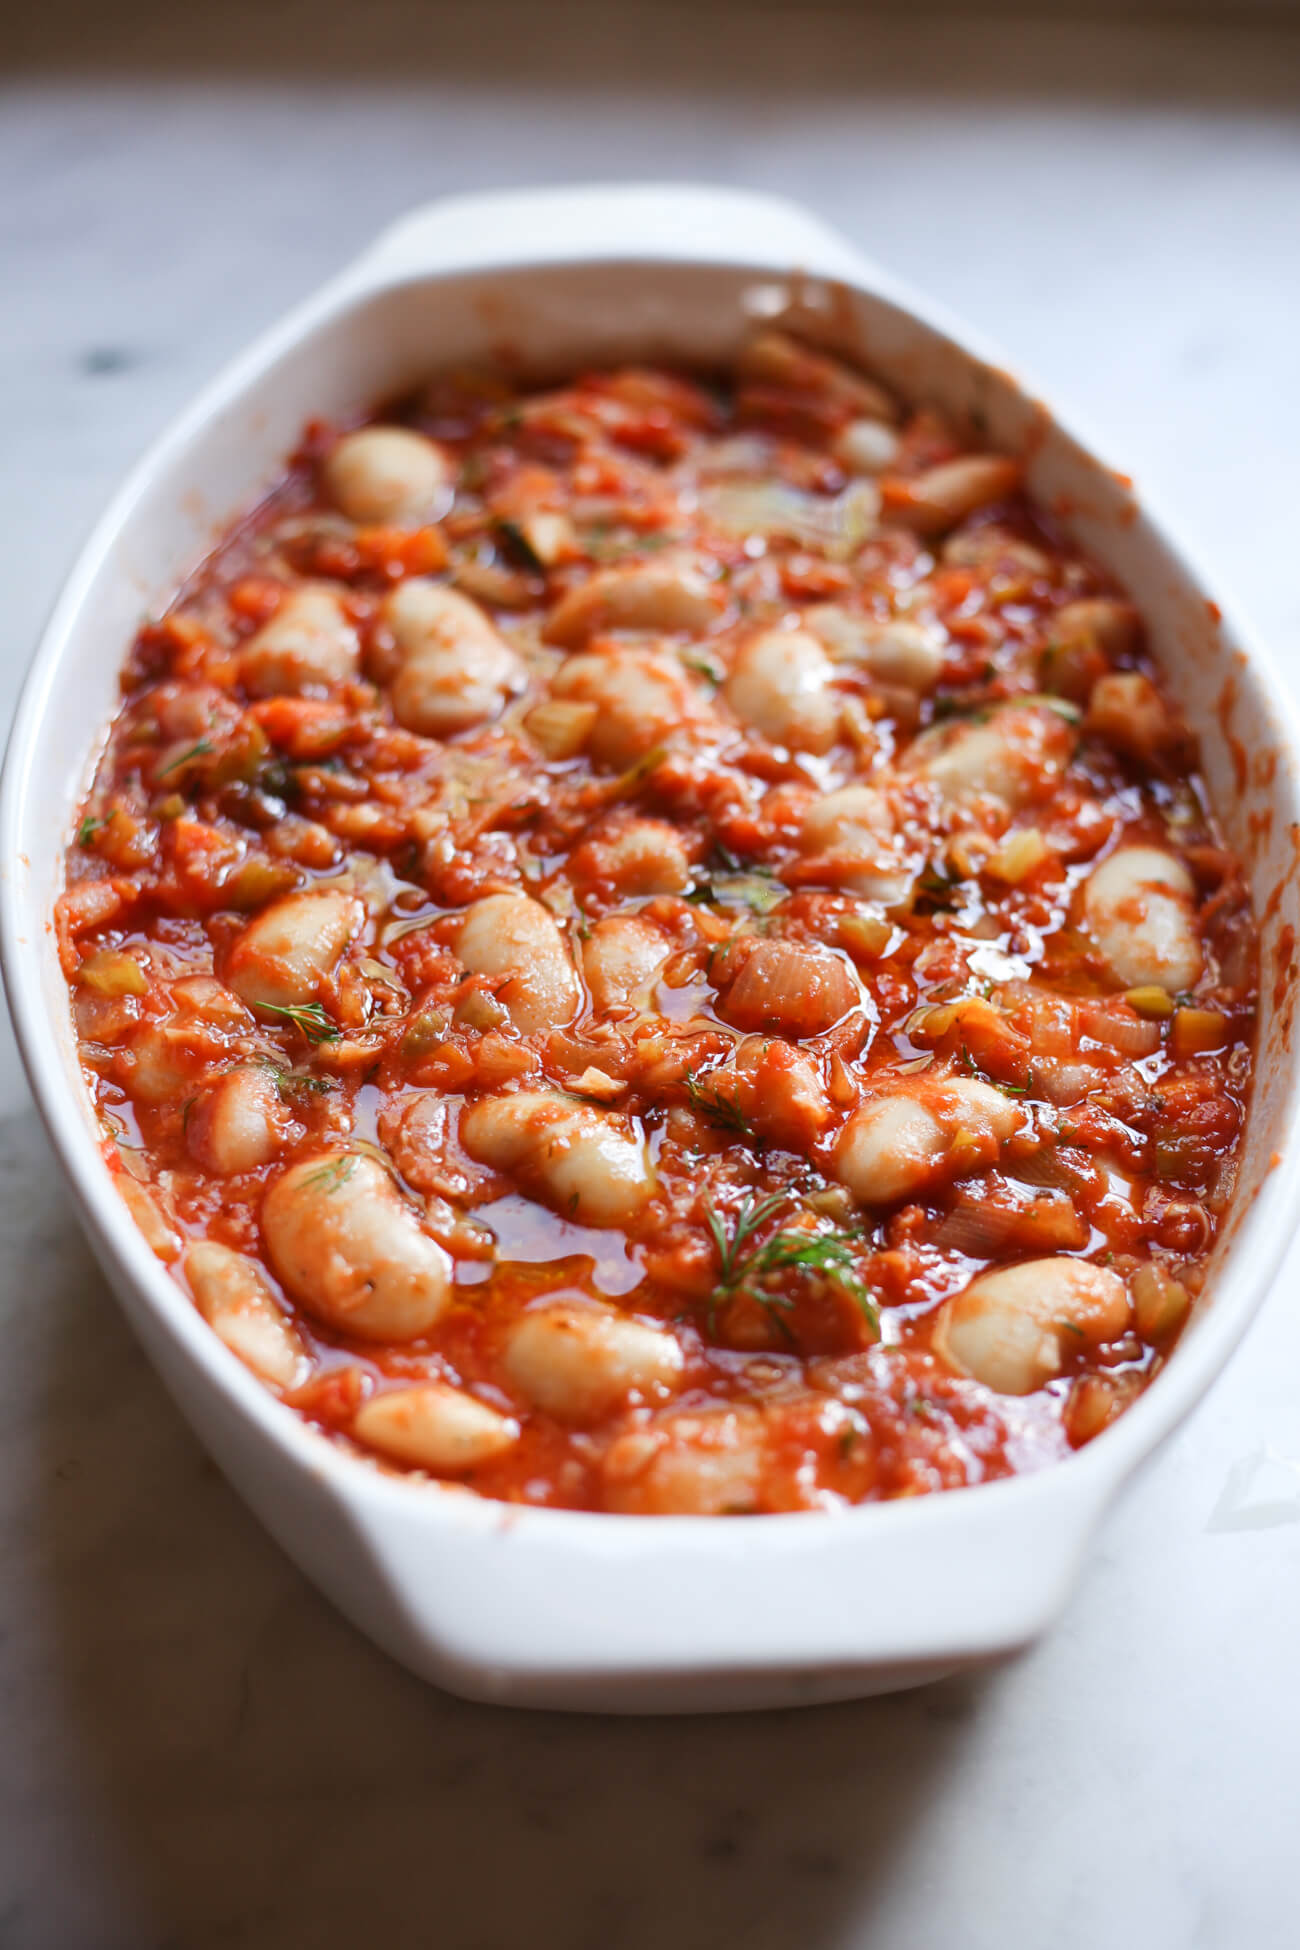 A white oval casserole dish filled with cooked giant Greek white beans and tomato sauce before cooking. This is how to make Gigantes Plaki, a vegetarian Greek recipe.